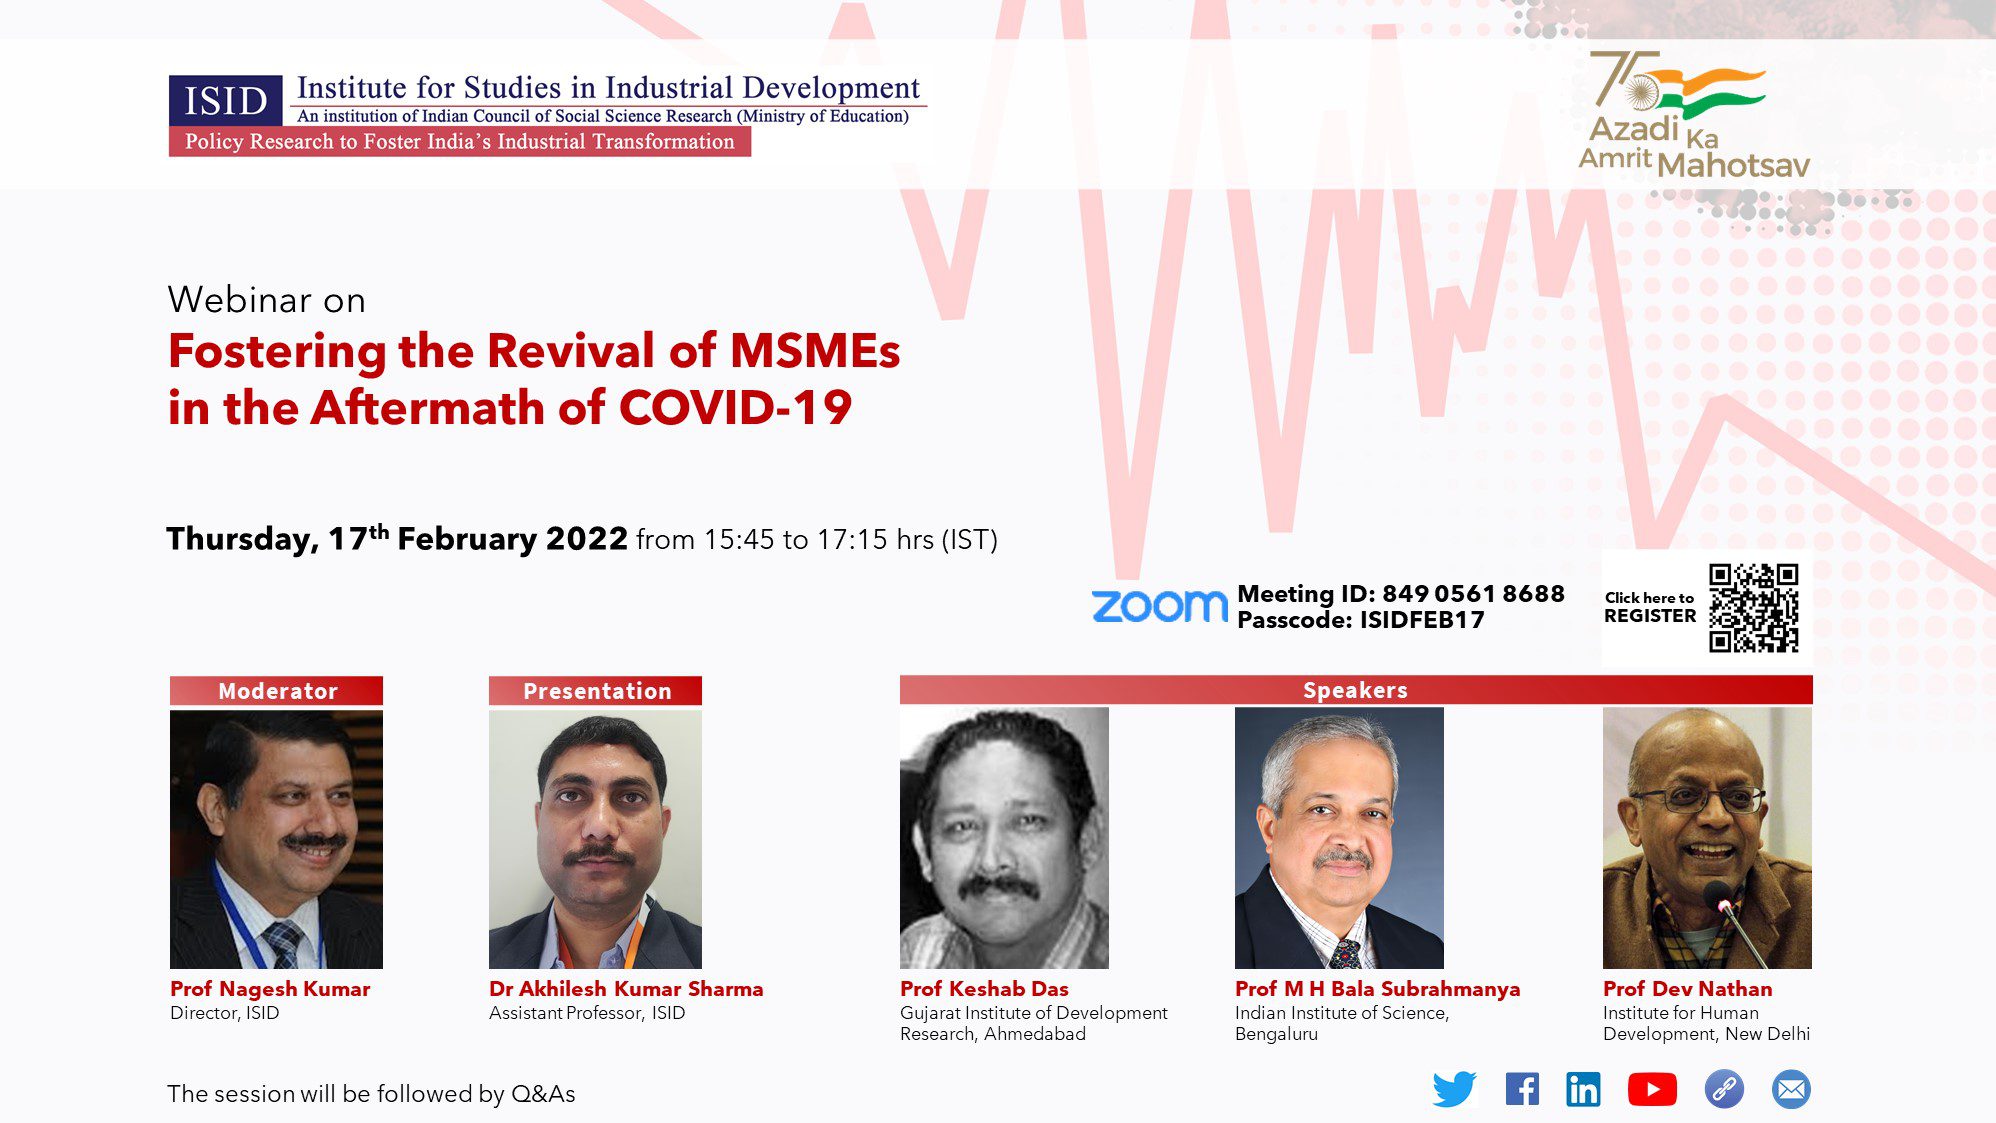 ISID Webinar on Fostering the Revival of MSMEs in the Aftermath of COVID-19